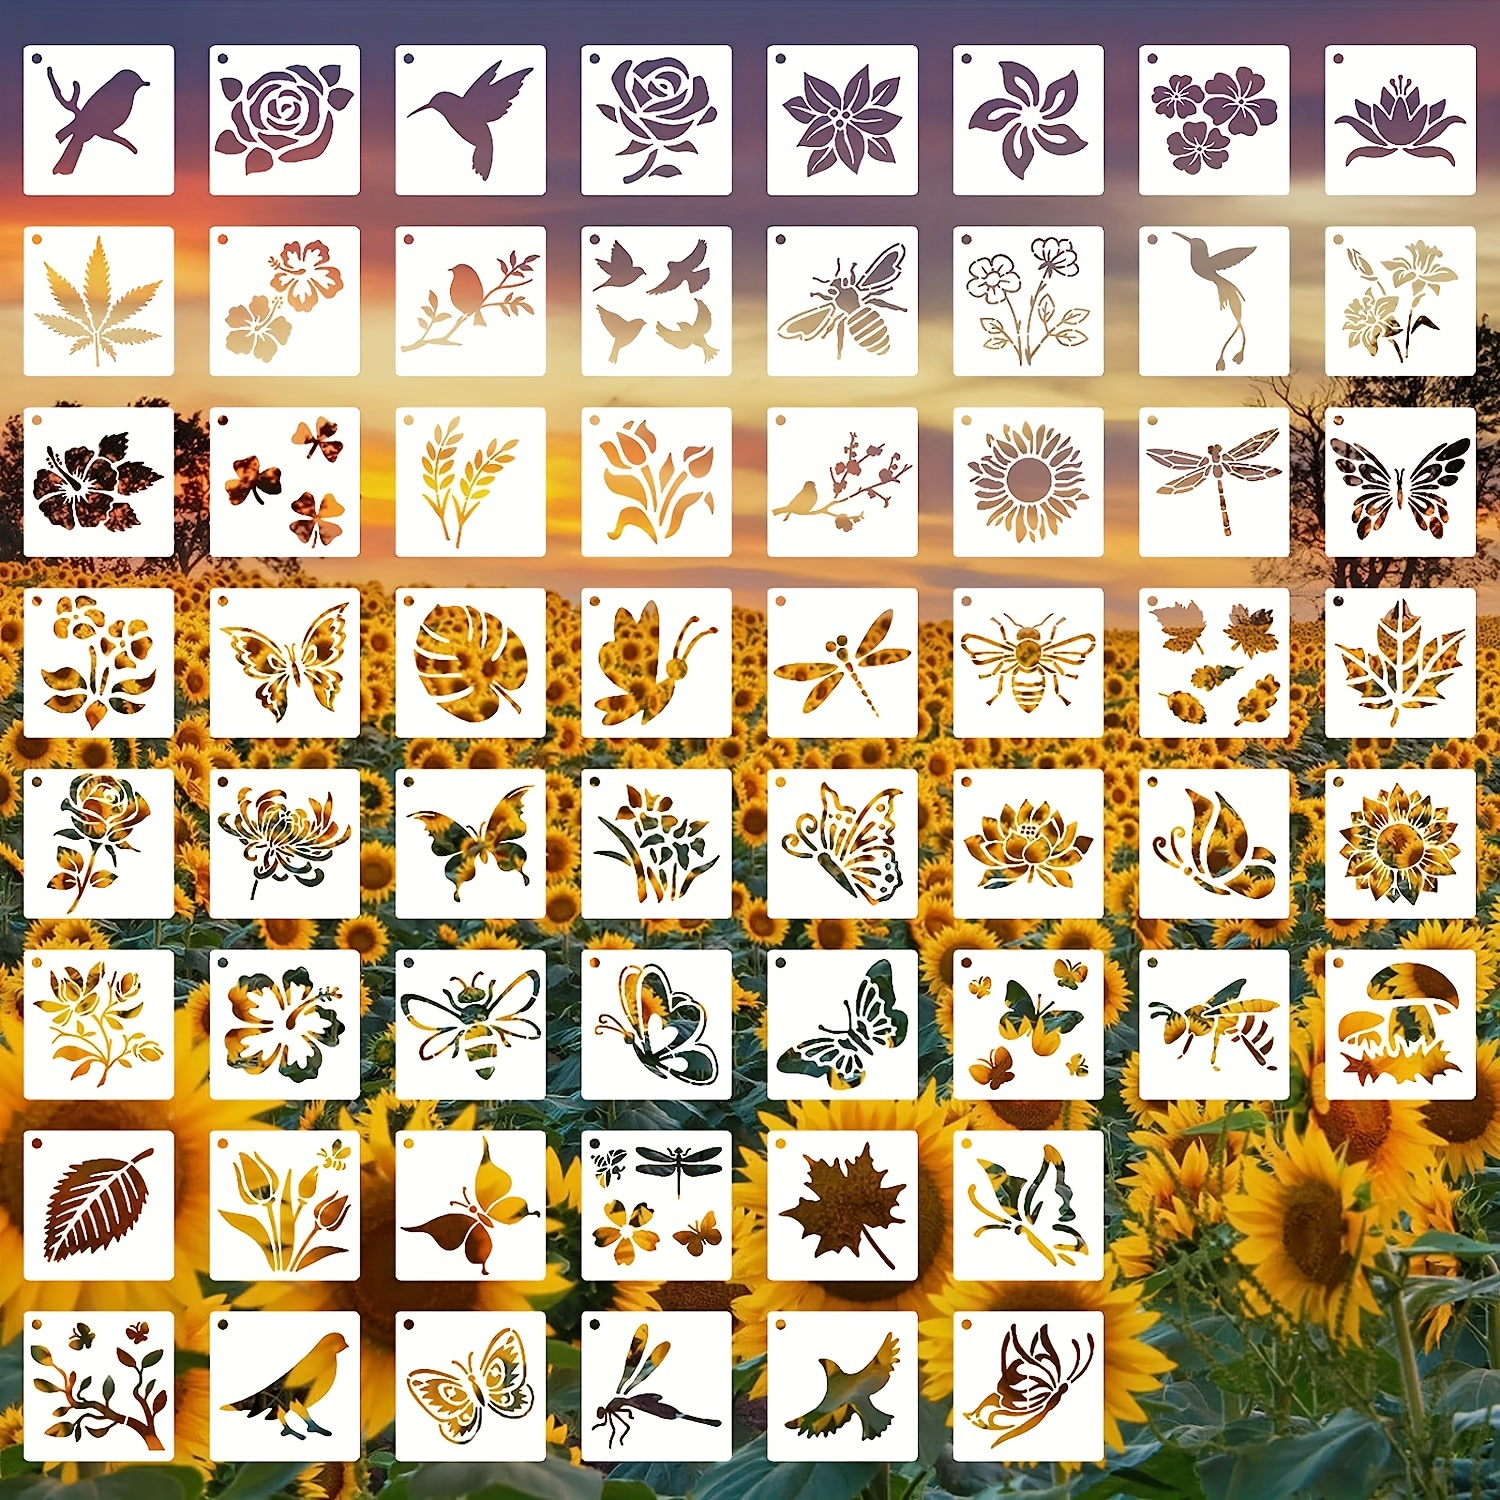 25 PCS Stencils for Painting, Reusable Flower Stencils 6x6in, Stencil Stuff  DIY Craft Template Paint Stencils for Painting On Wood Wall Home Decor